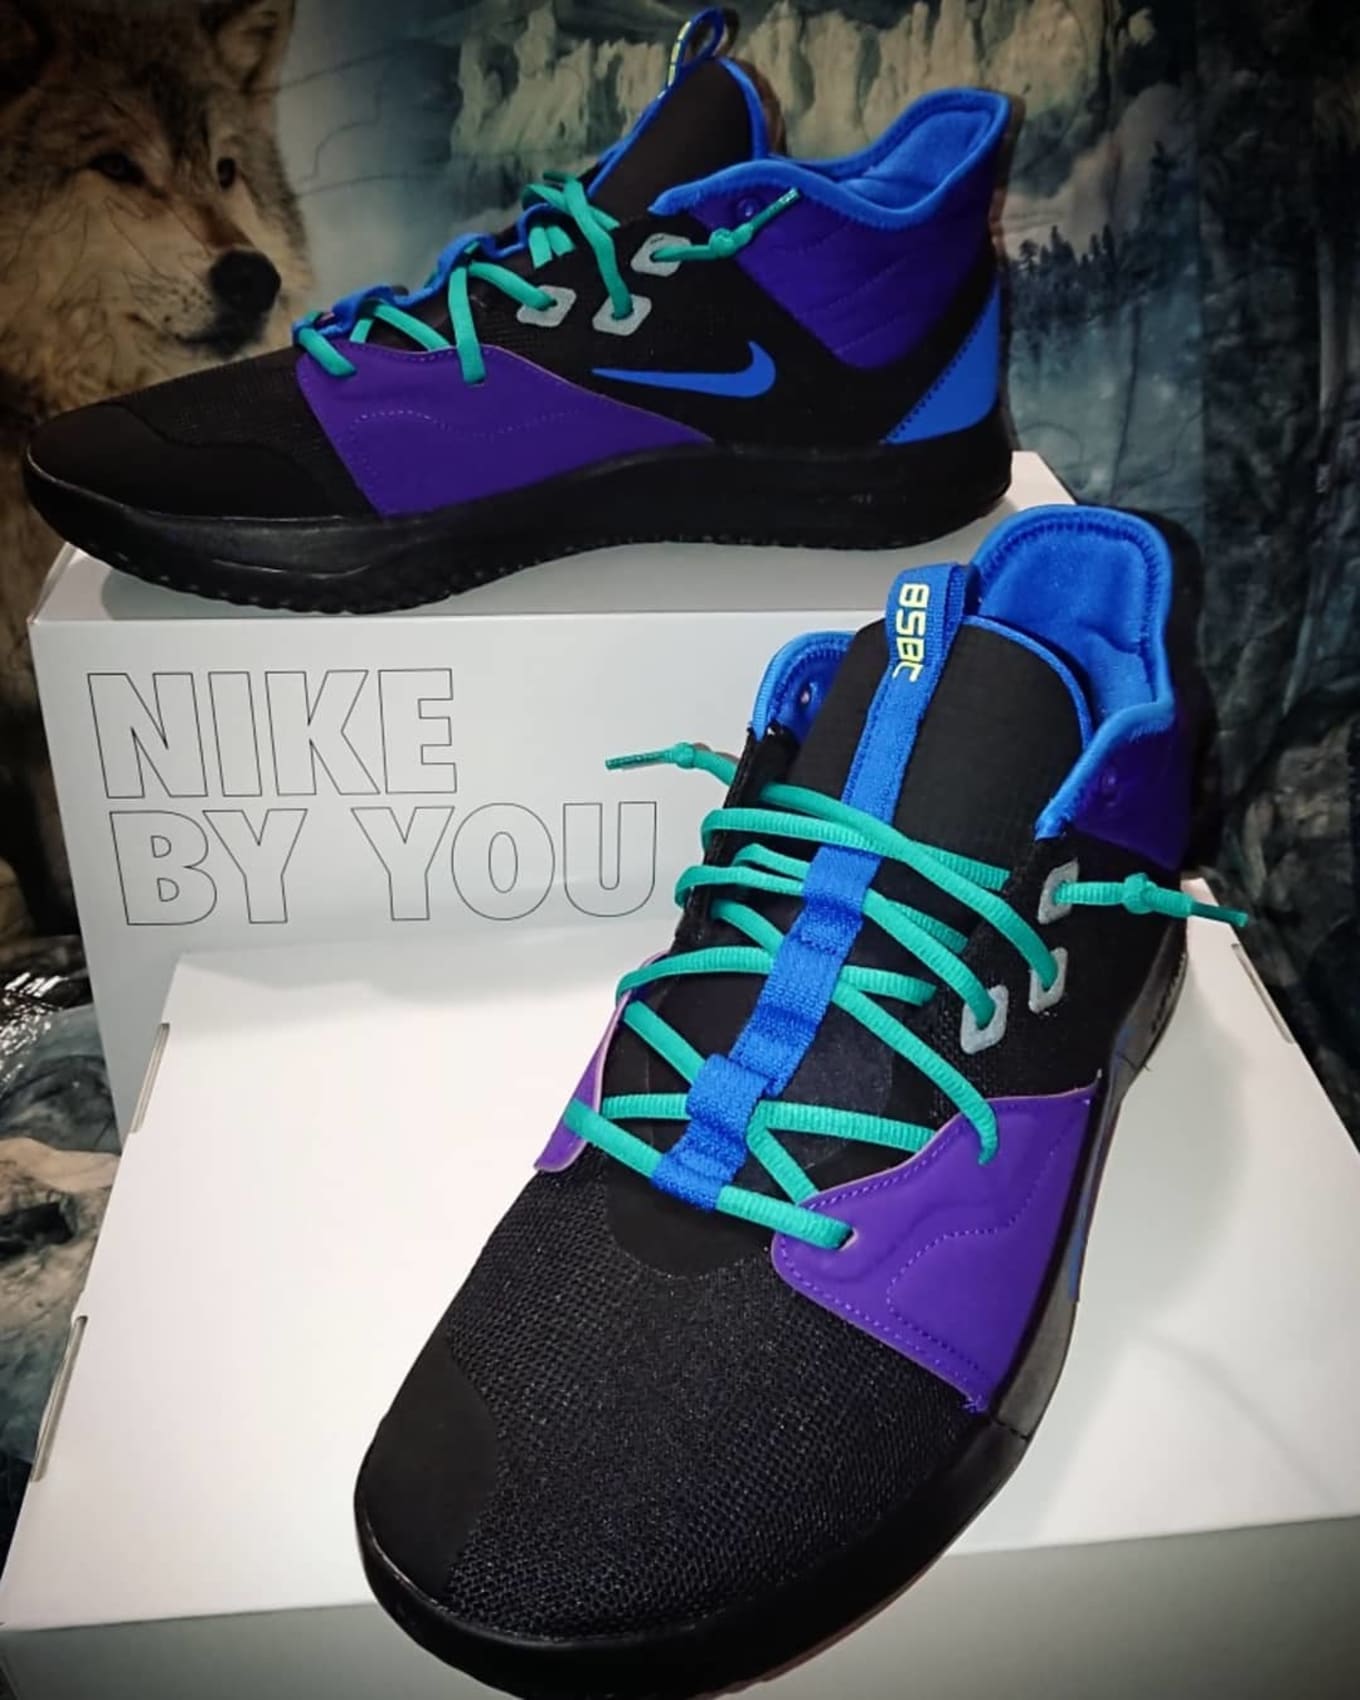 nike pg3 by you